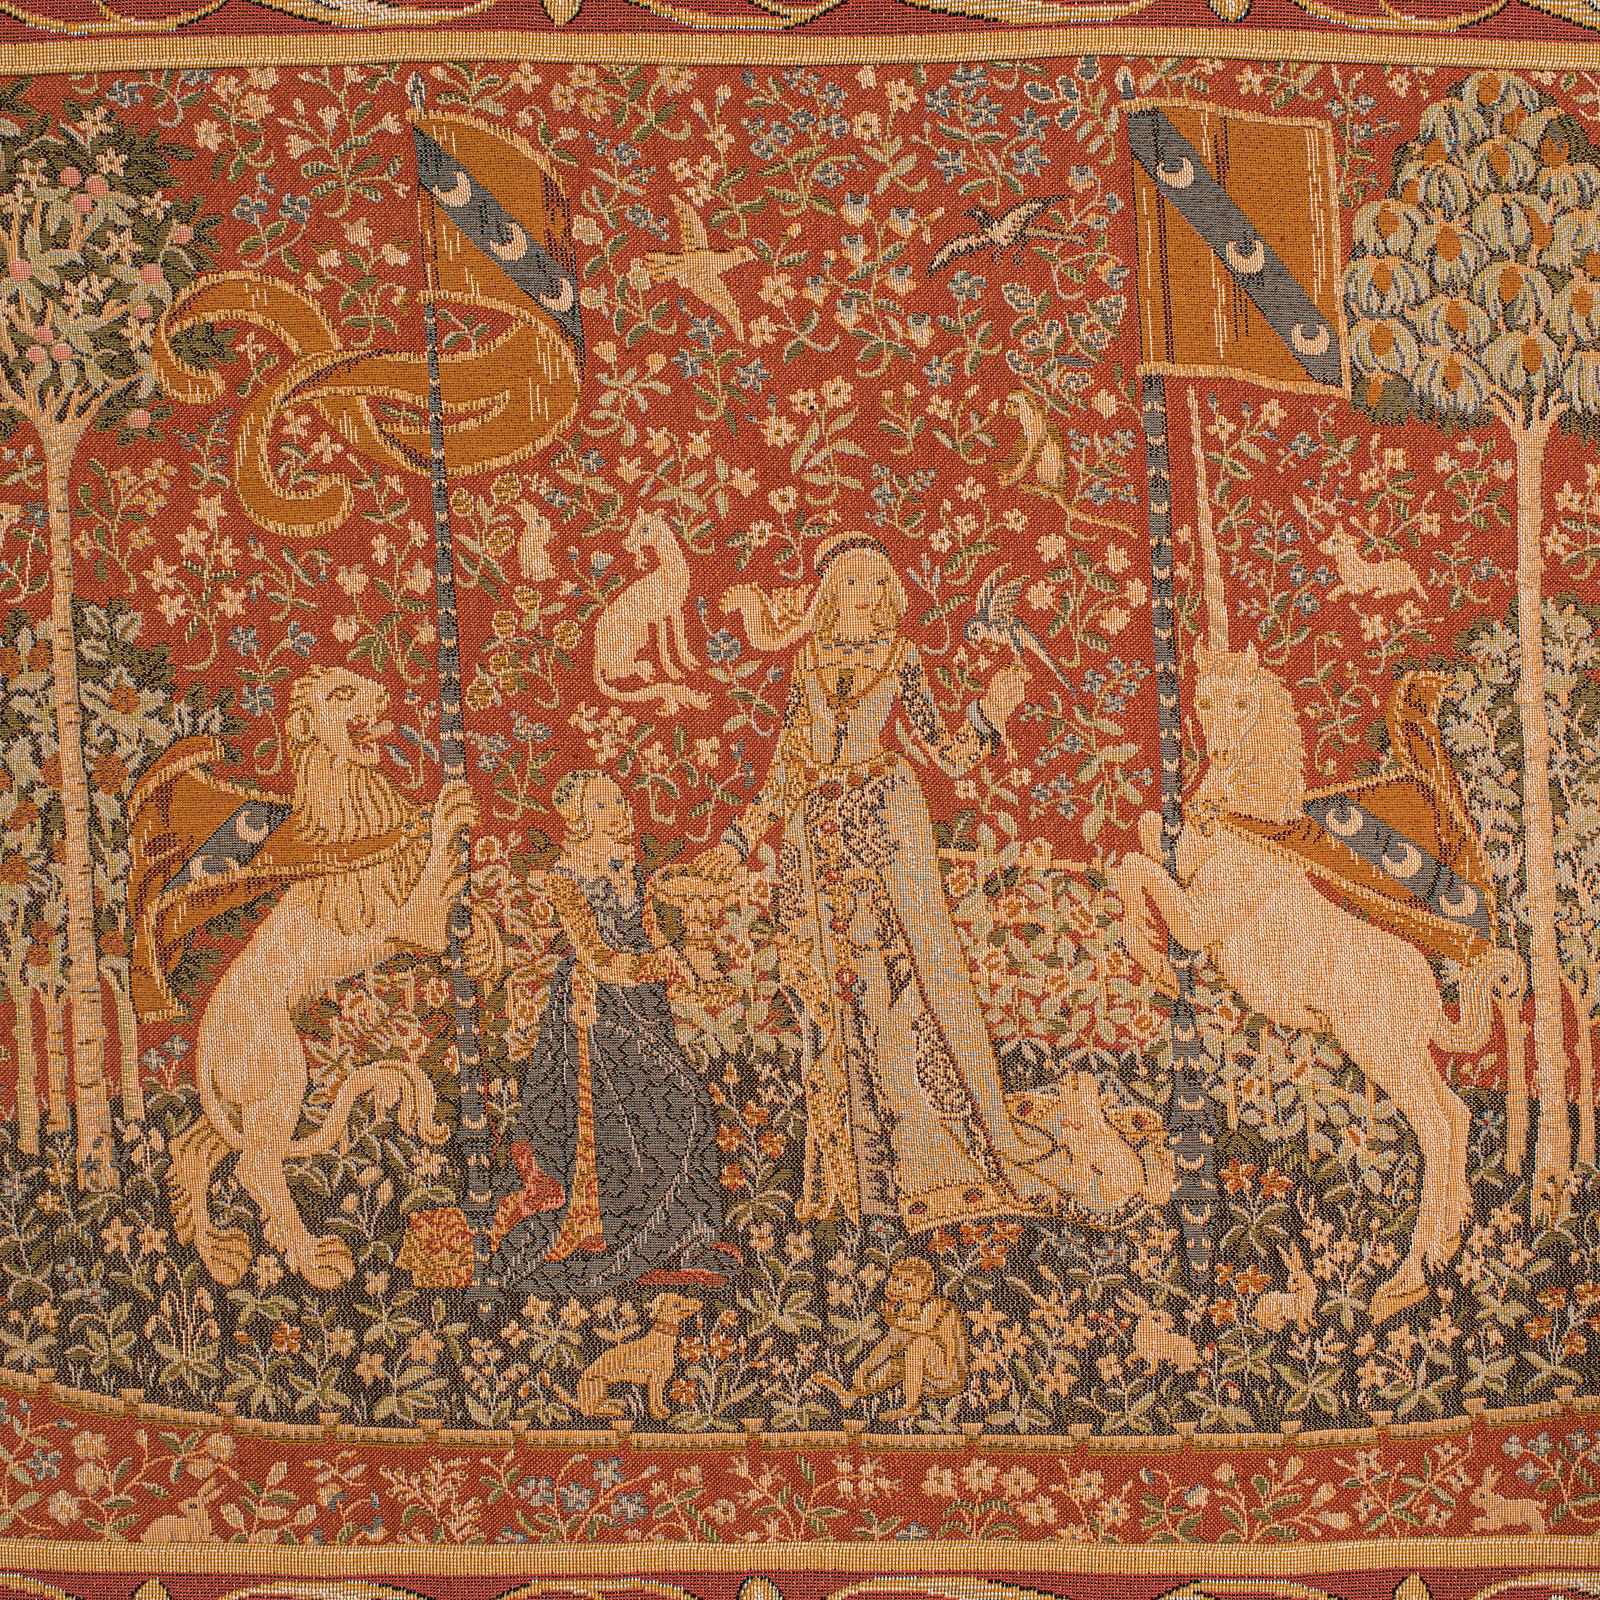 British Vintage Wall Tapestry, English, Needlepoint, the Lady and the Unicorn, c.1980